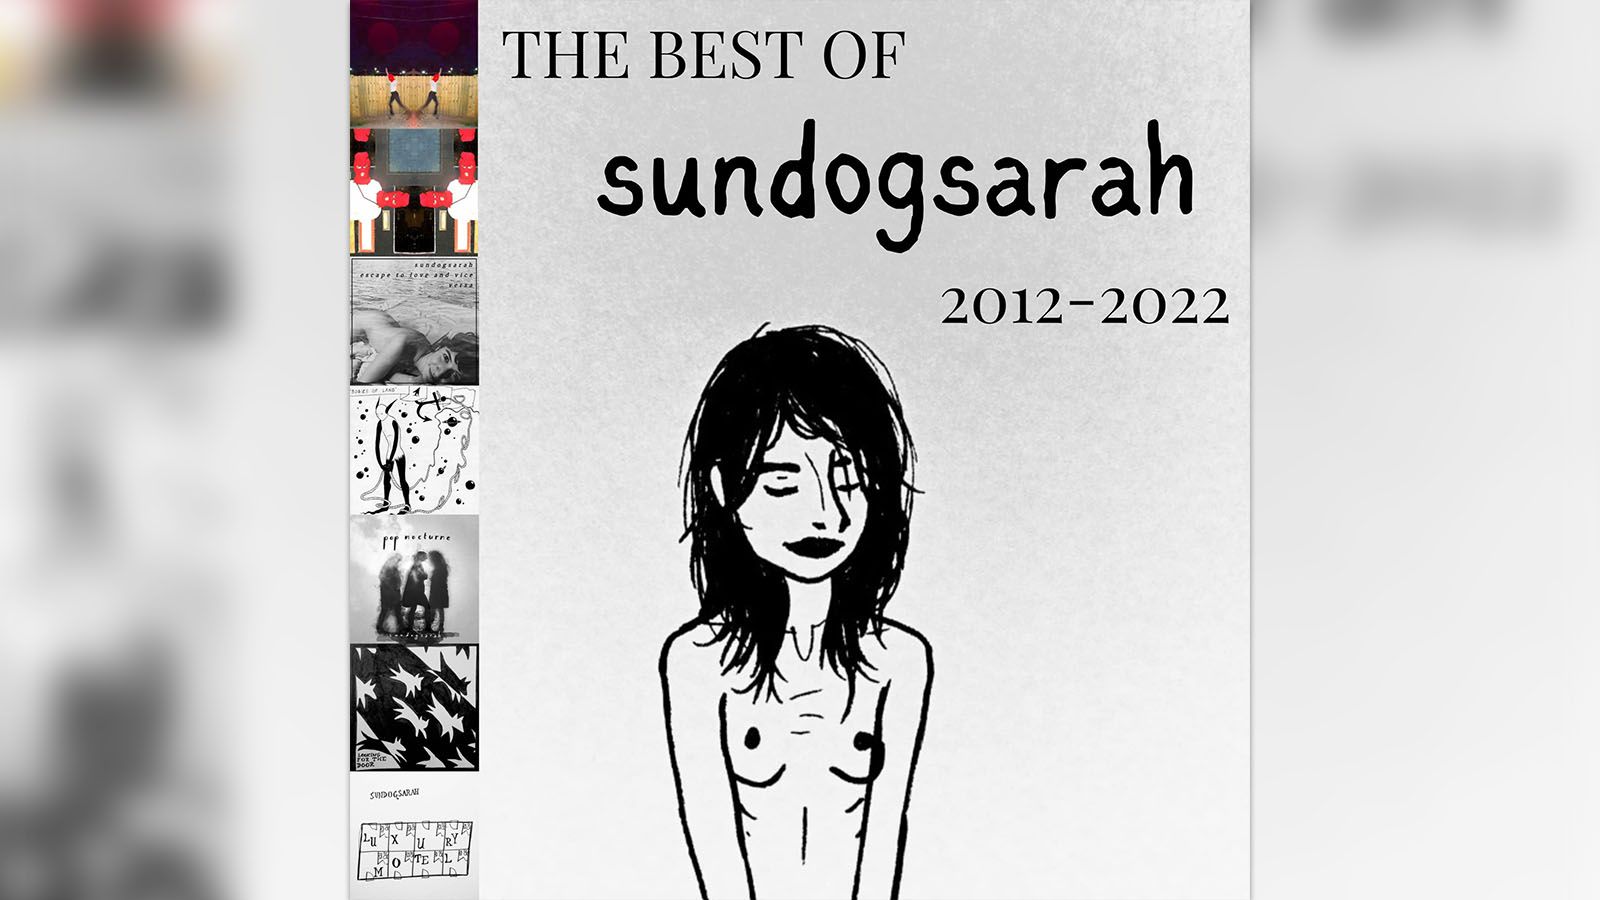 sundogsarah's music from the past decade has been compiled into a "Best of."